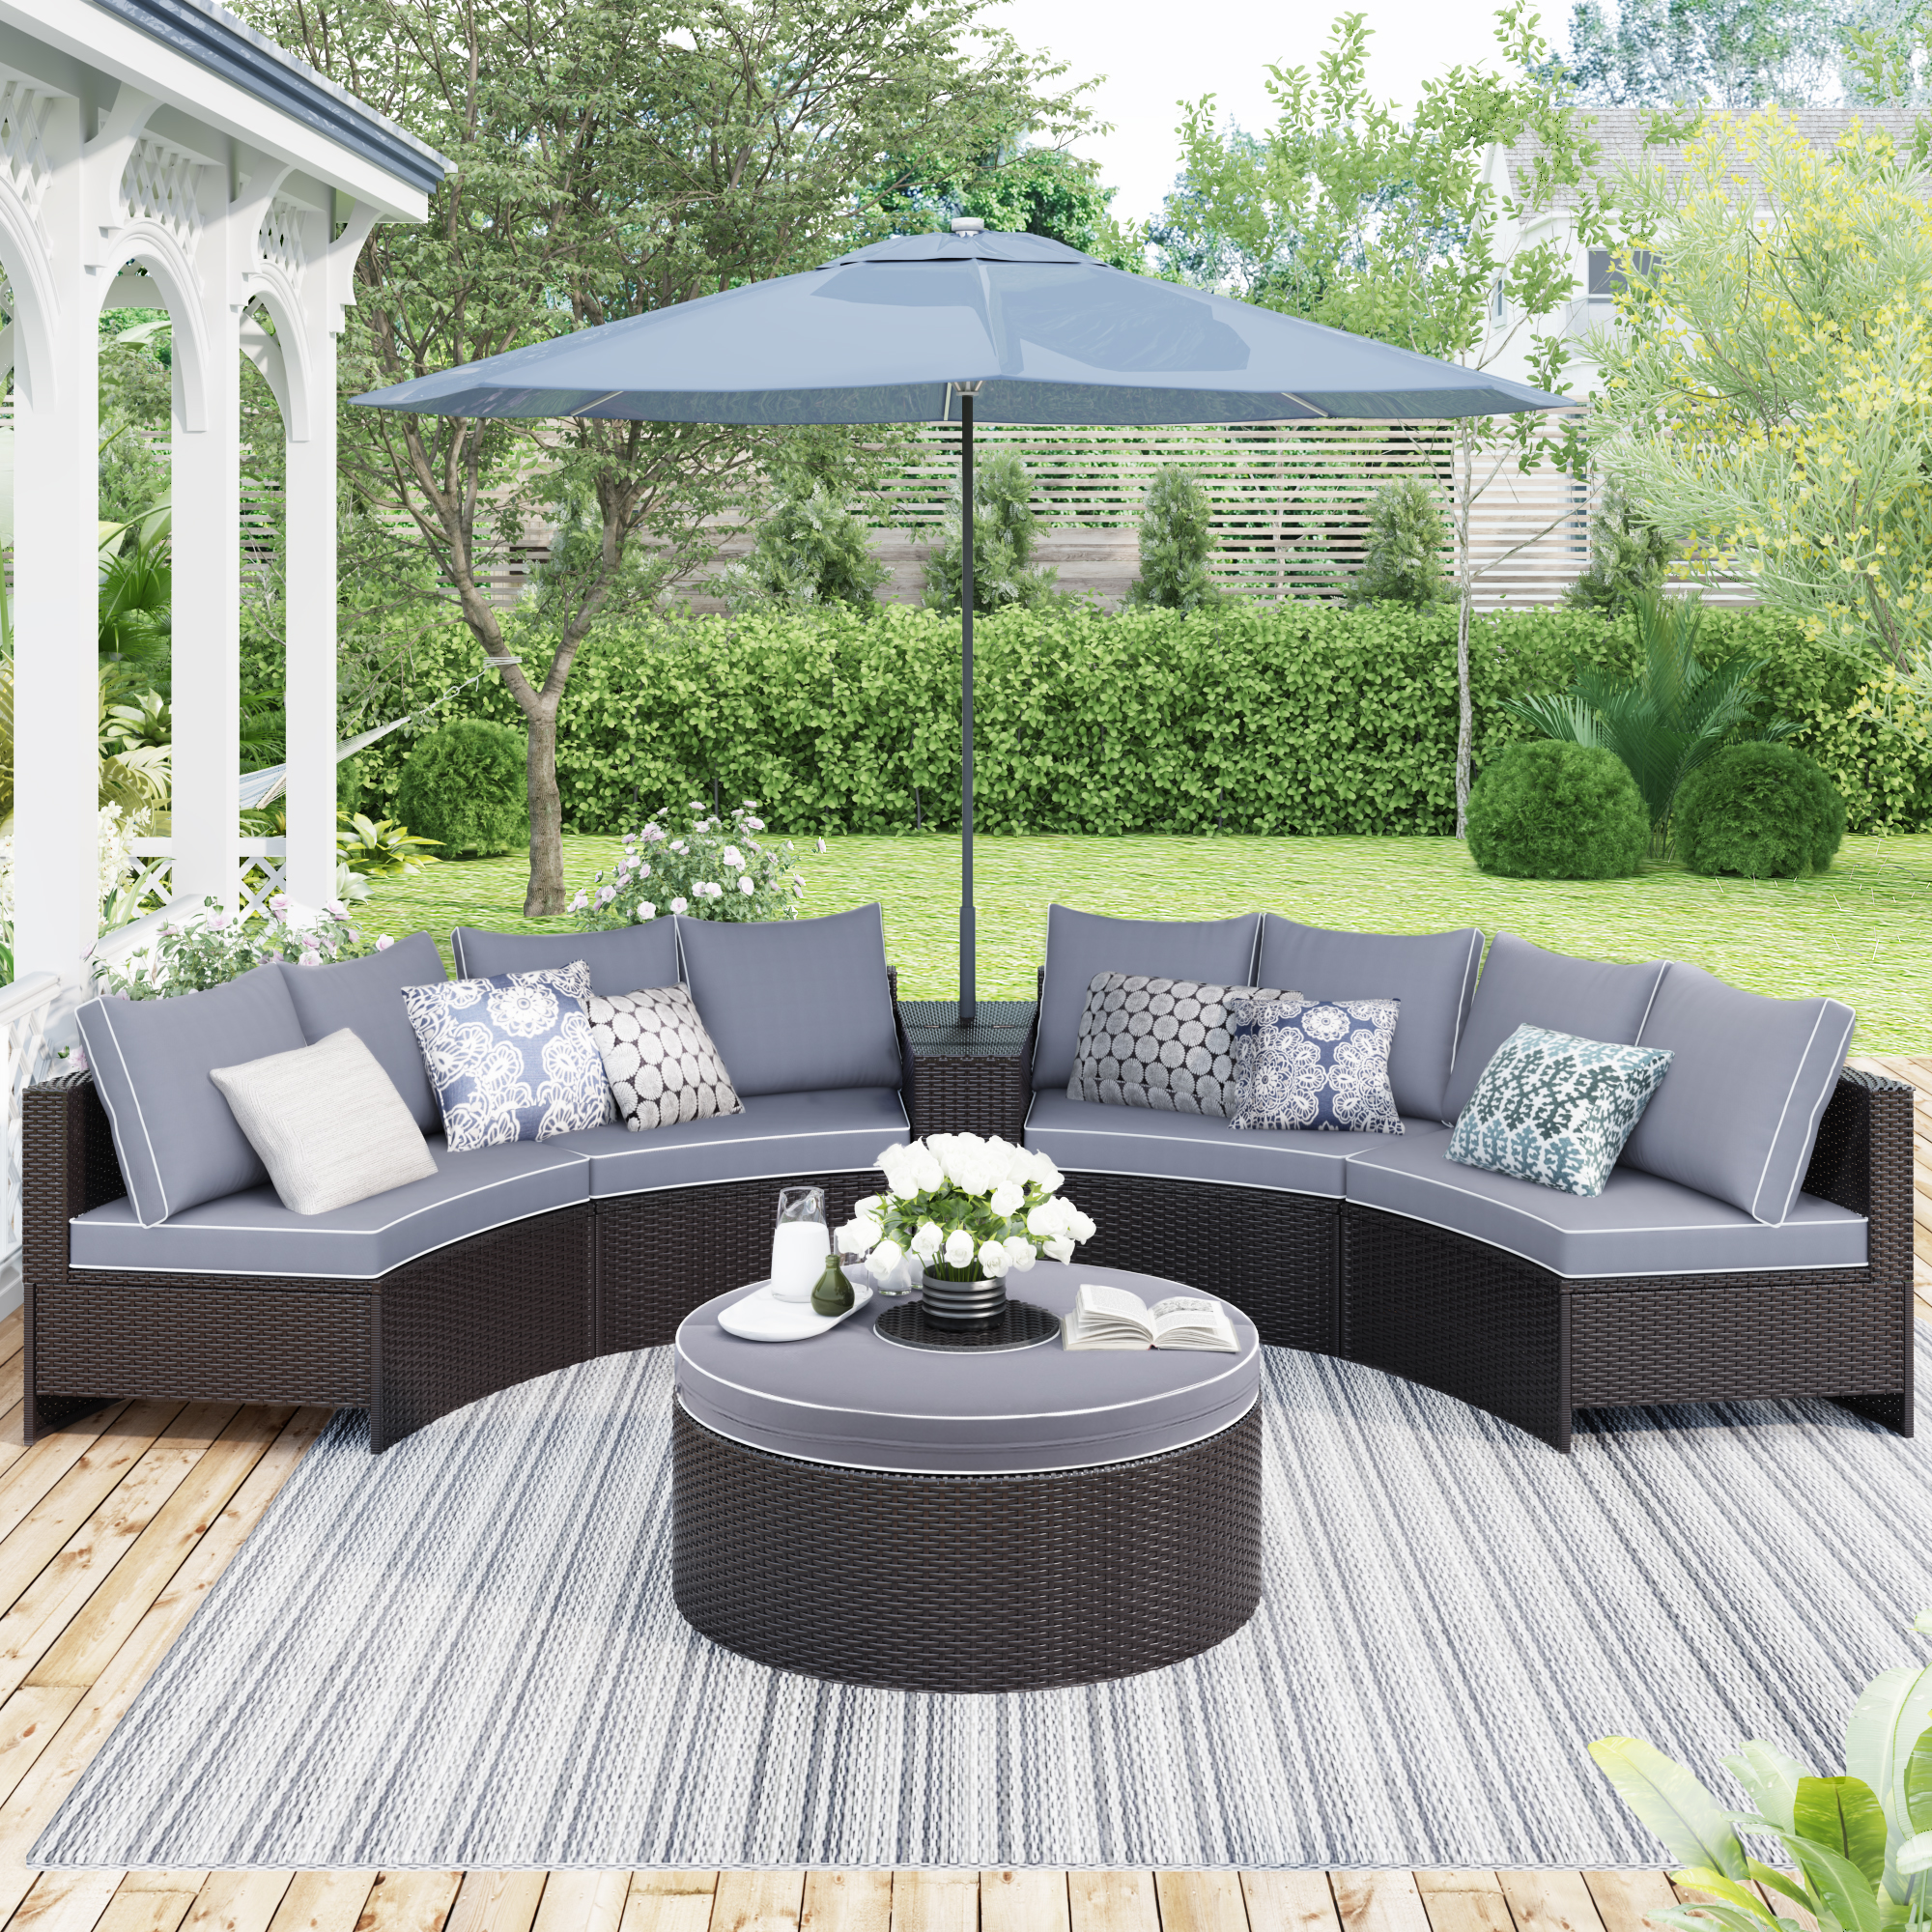 6-Pieces Outdoor PE Wicker Conversation Furniture Set Sectional Half Round Patio Rattan Sofa Set with Storage Side Table for Umbrella and Round Coffee Table, Gray Cushions + Brown Wicker - image 1 of 8